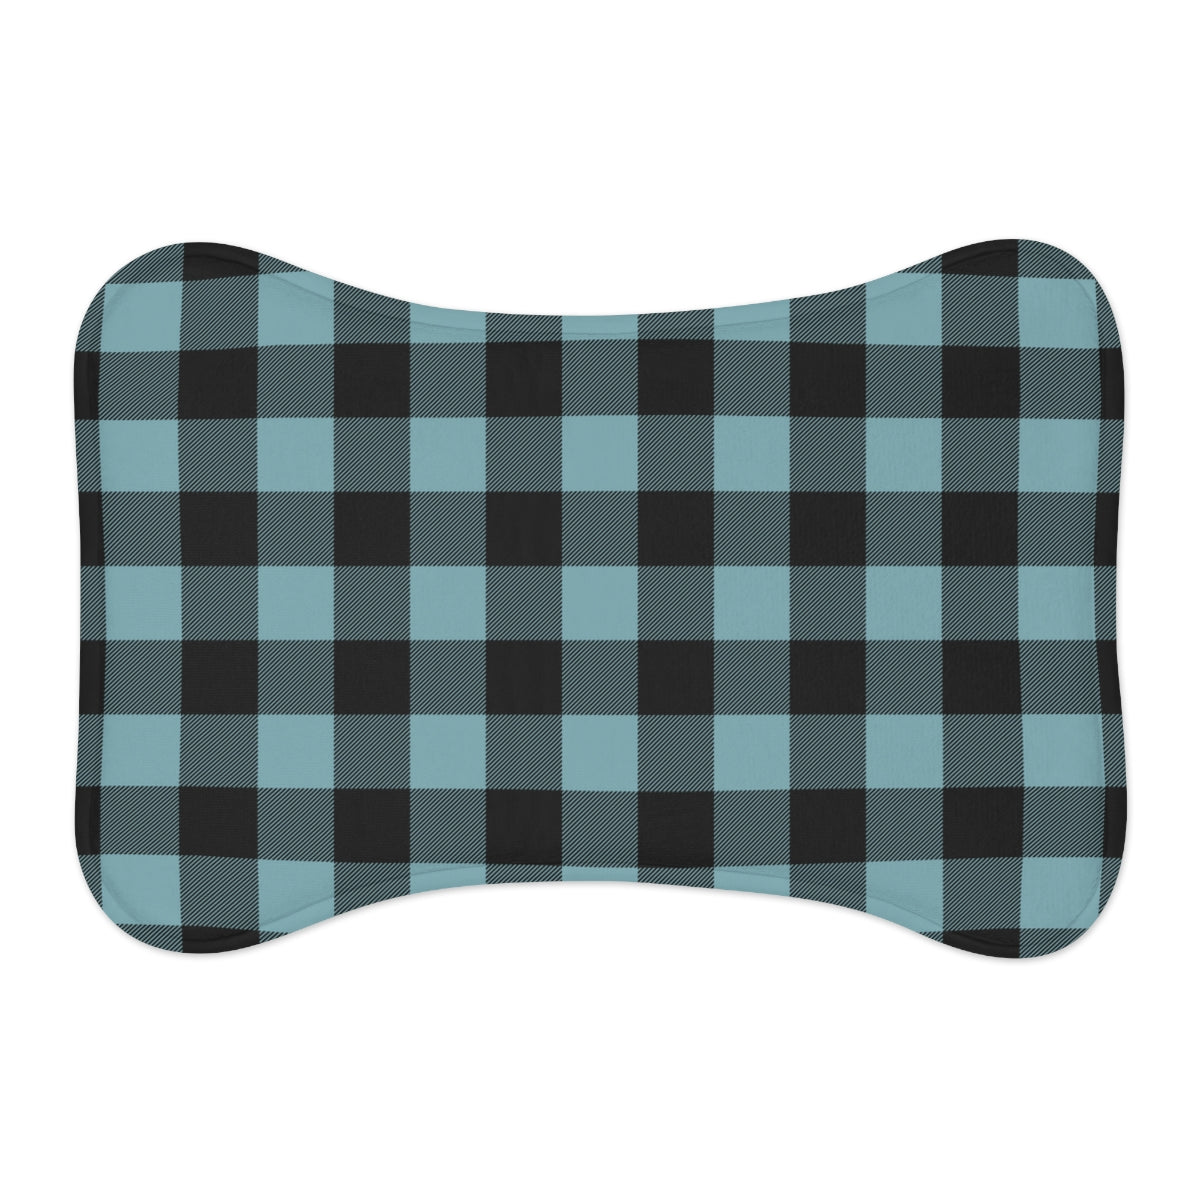 APG Blue Gingham Magic Dough Pastry Mat - The Kitchen Table